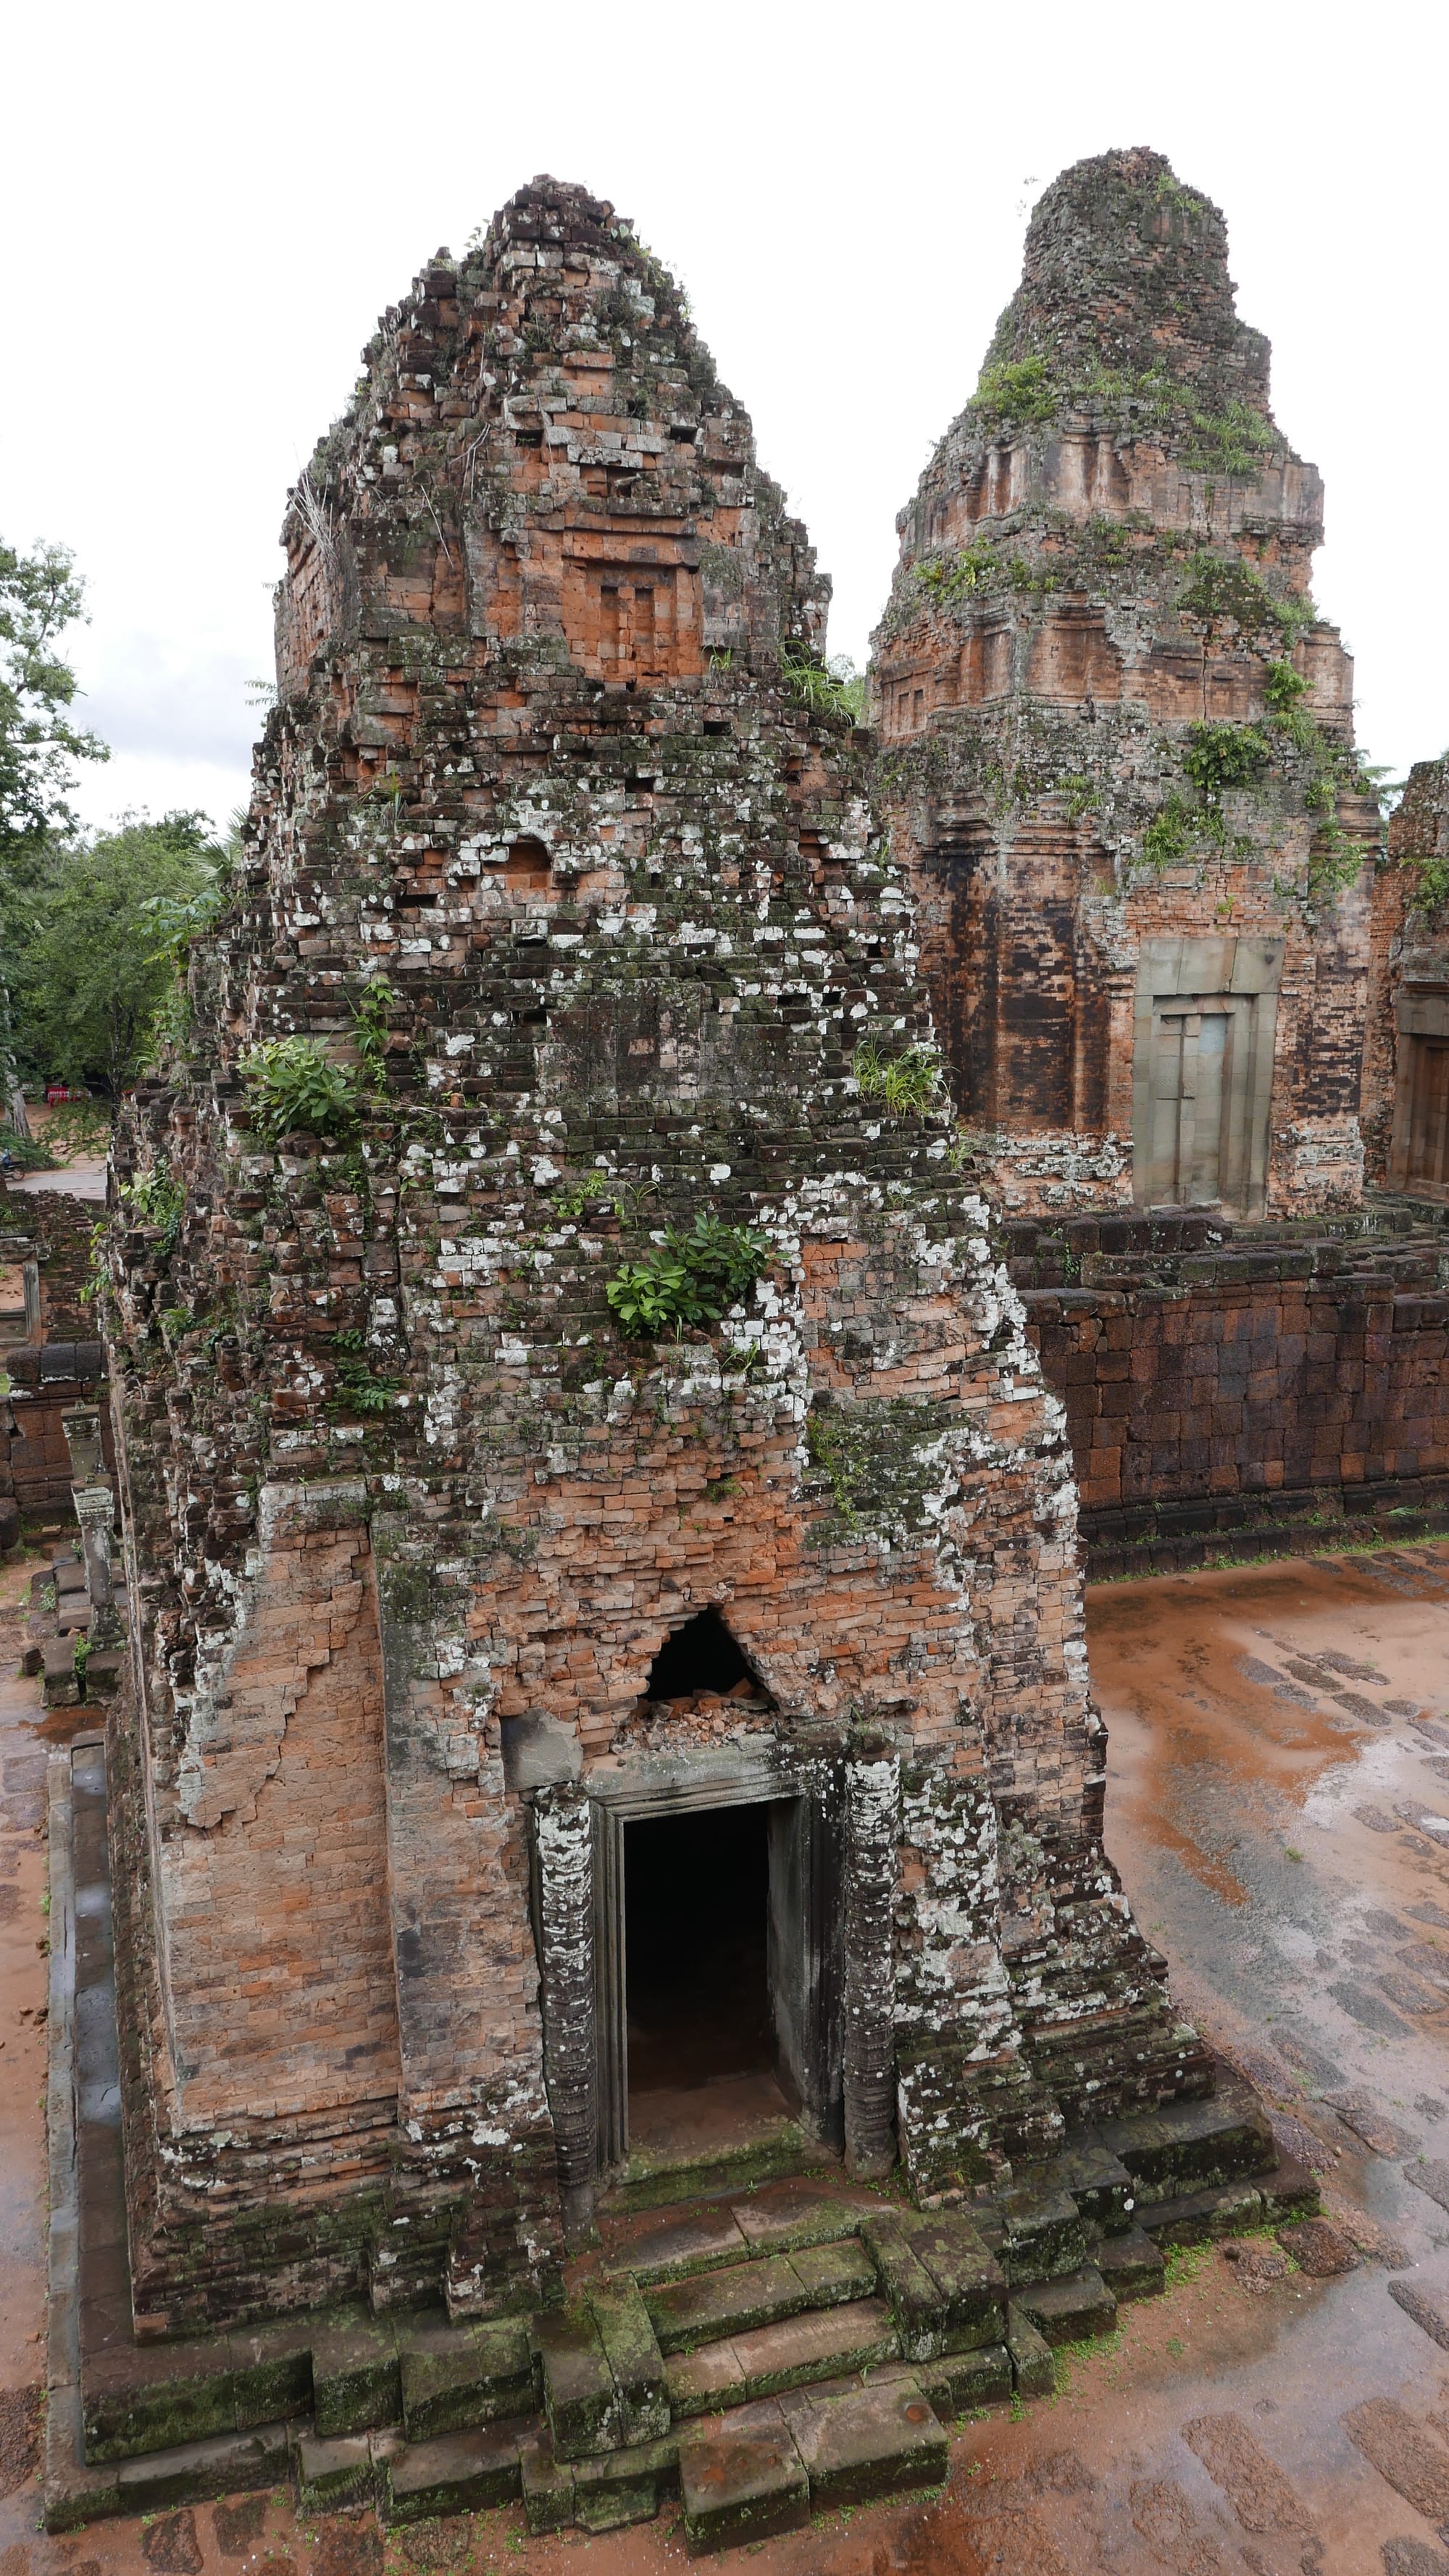 Photo by Author — the central Prasat with one of the four other Prasats visible — Pre Rup (ប្រែរូប), Angkor Archaeological Park, Angkor, Cambodia